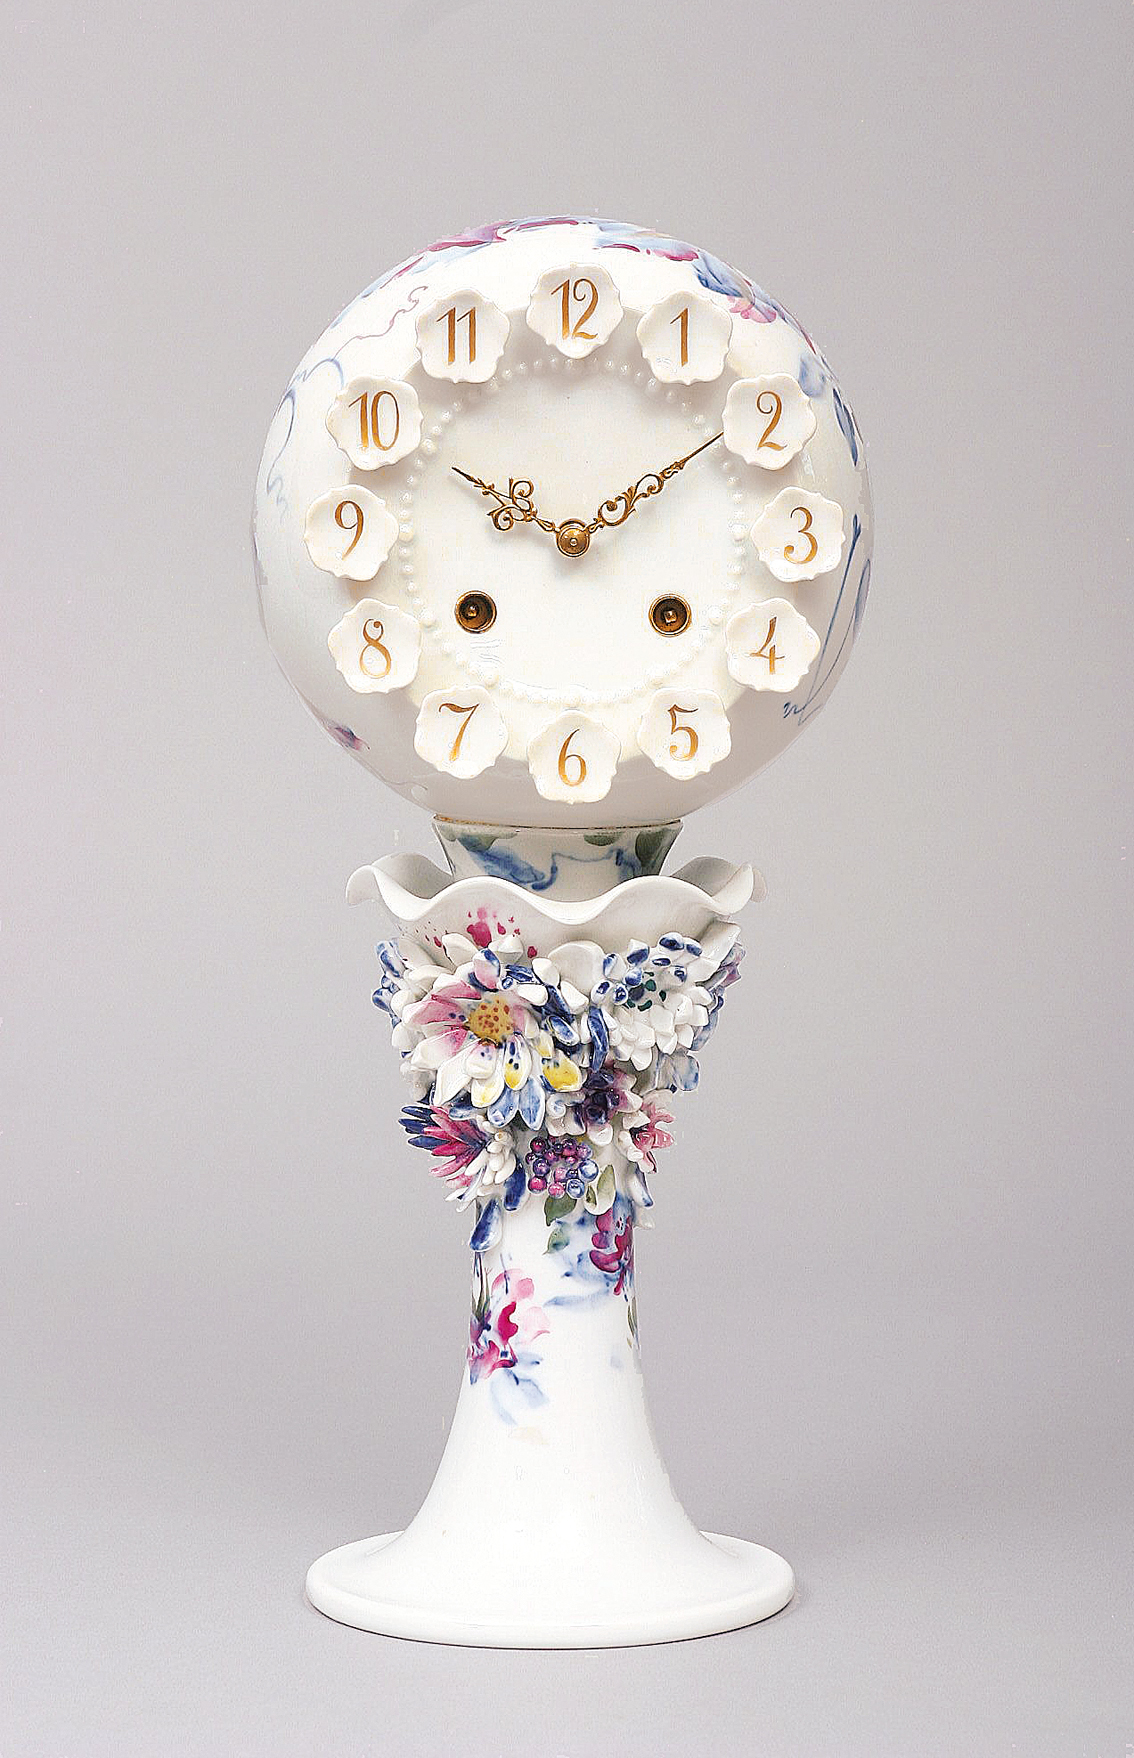 A rare modern model of a clock with floral decoration